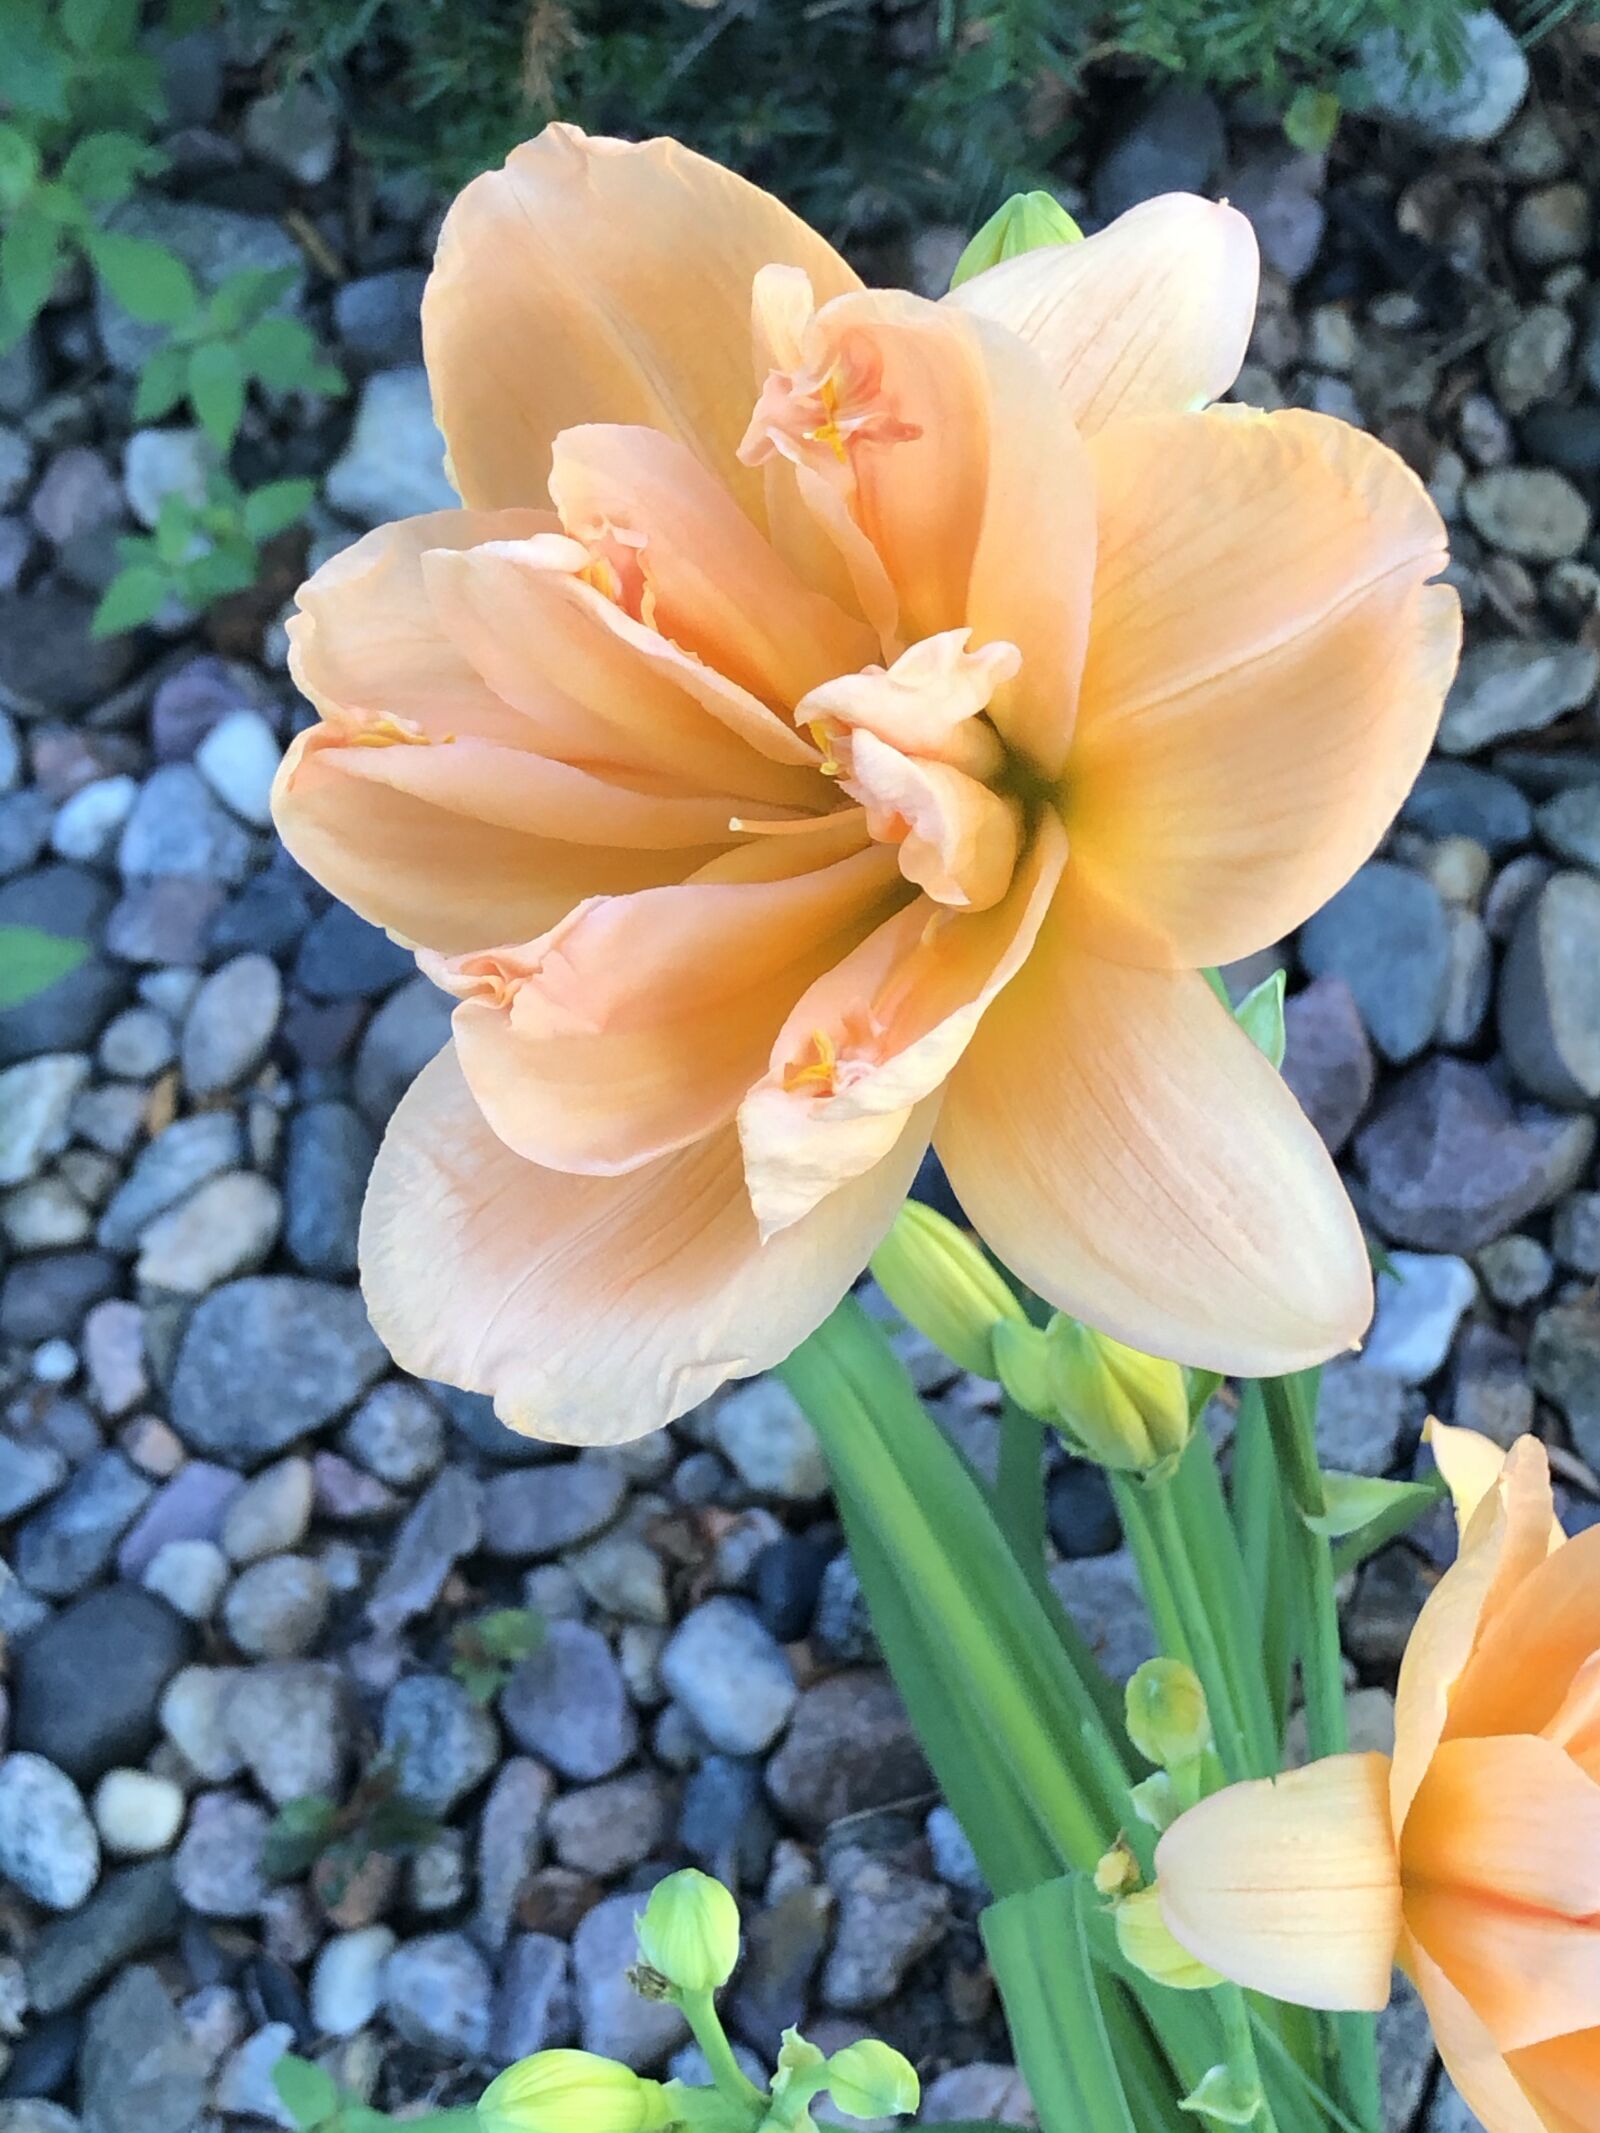 iPhone 8 Plus back dual camera 3.99mm f/1.8 sample photo. Day lily, peach magnolia photography